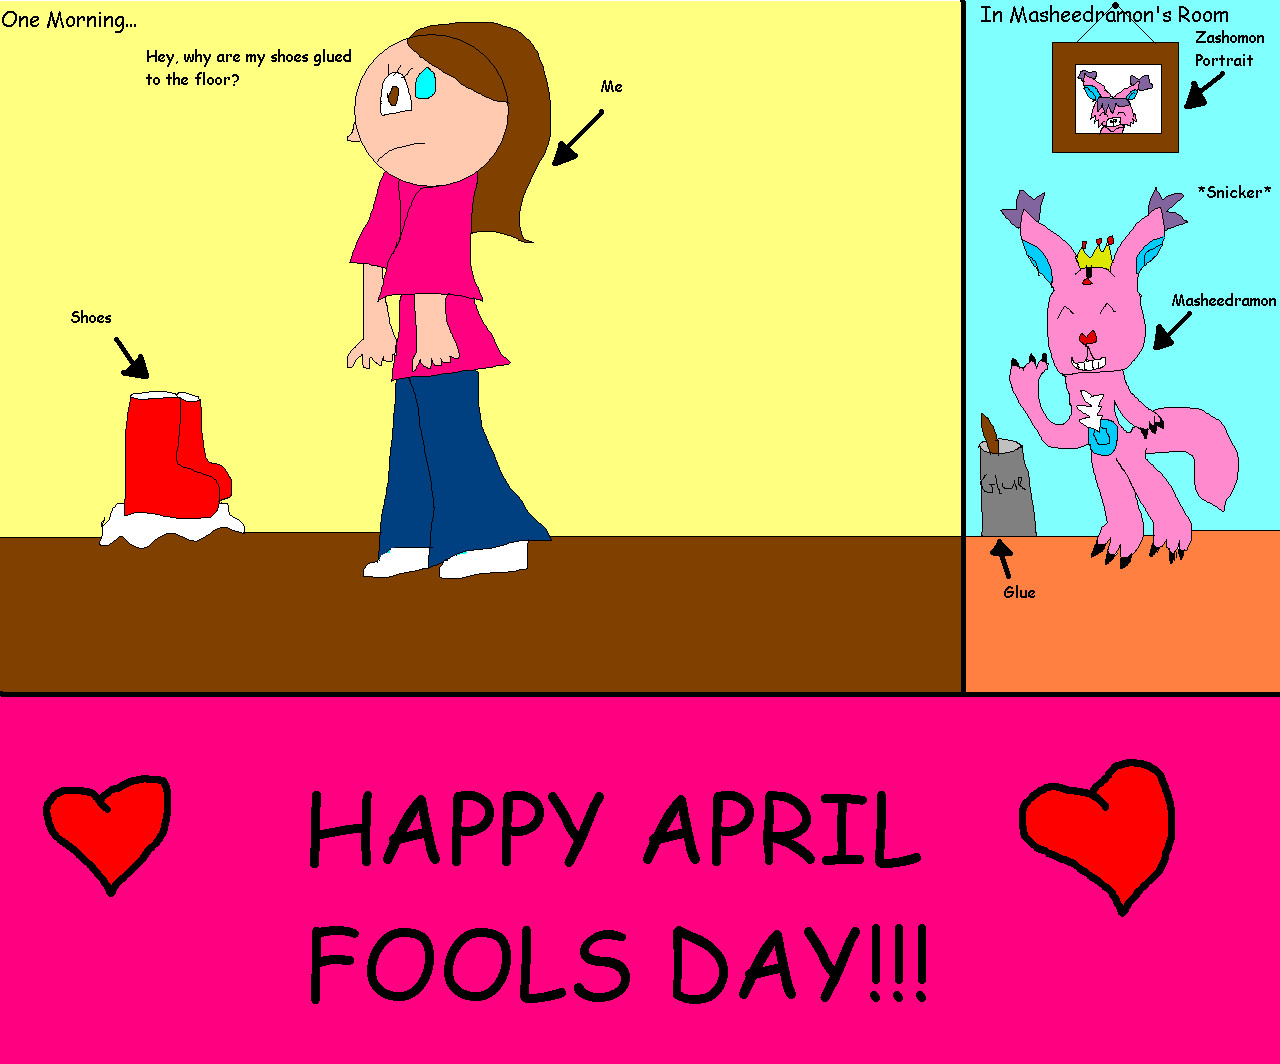 April Fools Day Comic Starring Me And Masheedramon by ginathehedgehog